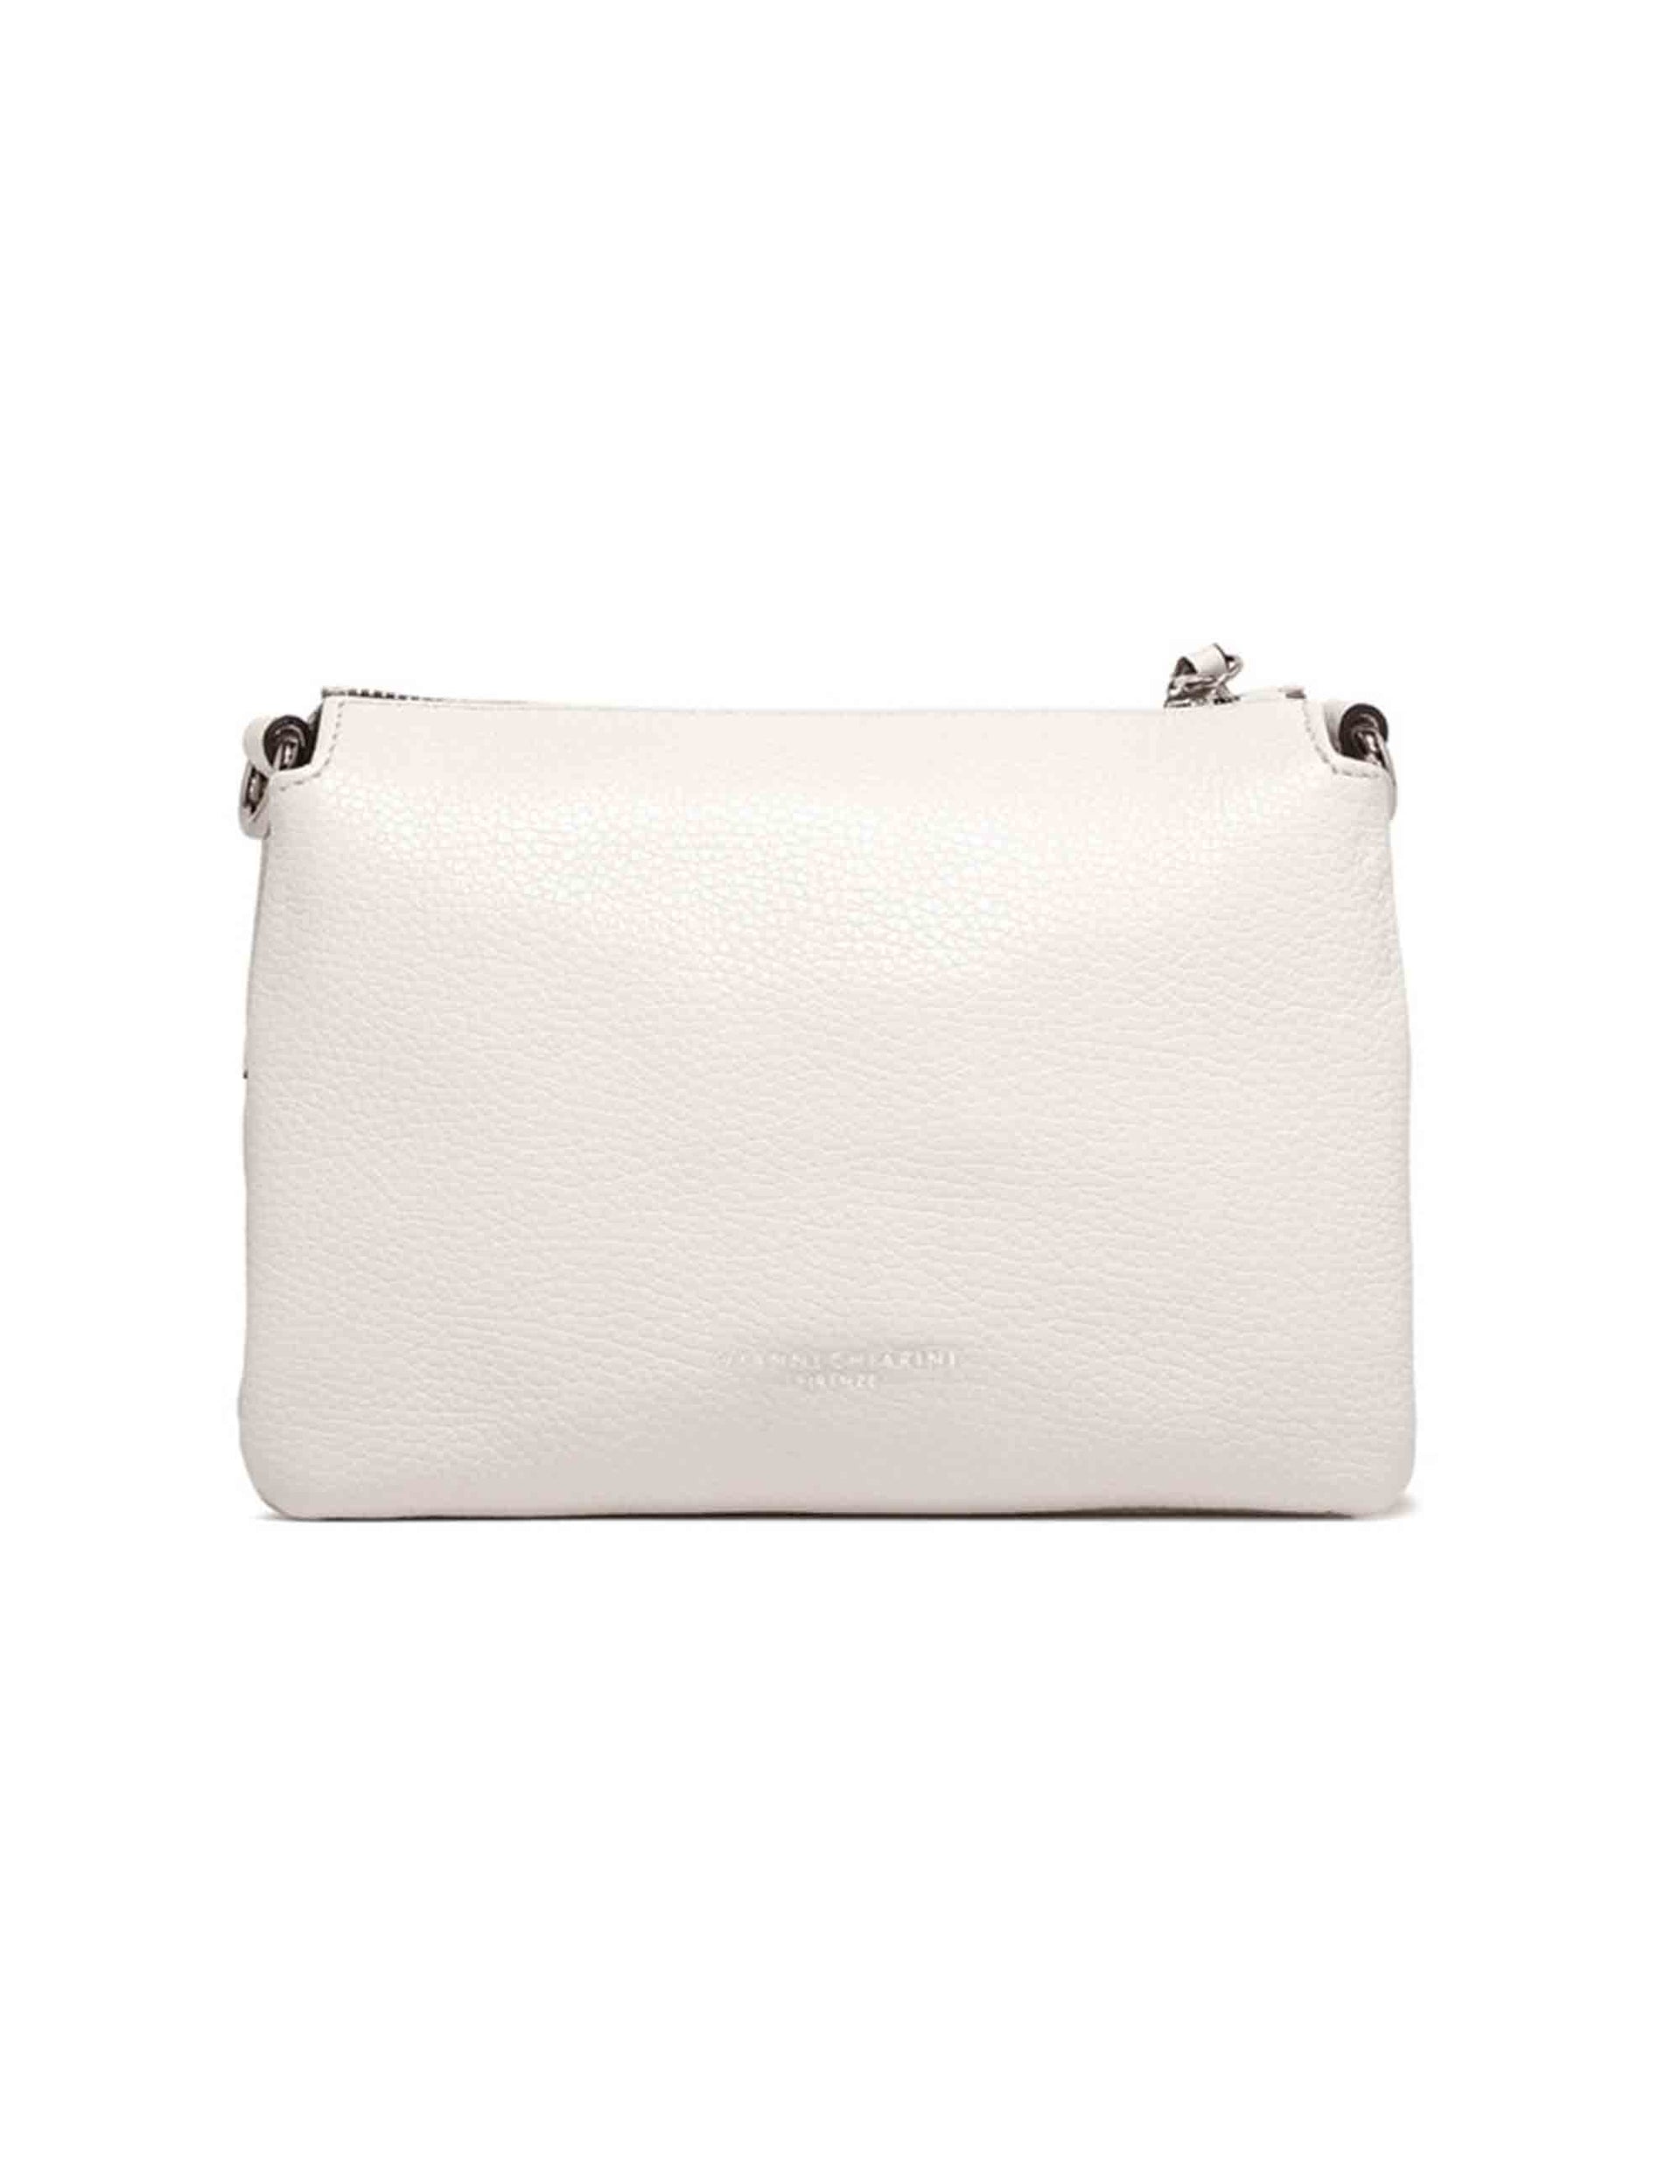 Three women's clutch bags in cream leather with matching removable shoulder strap